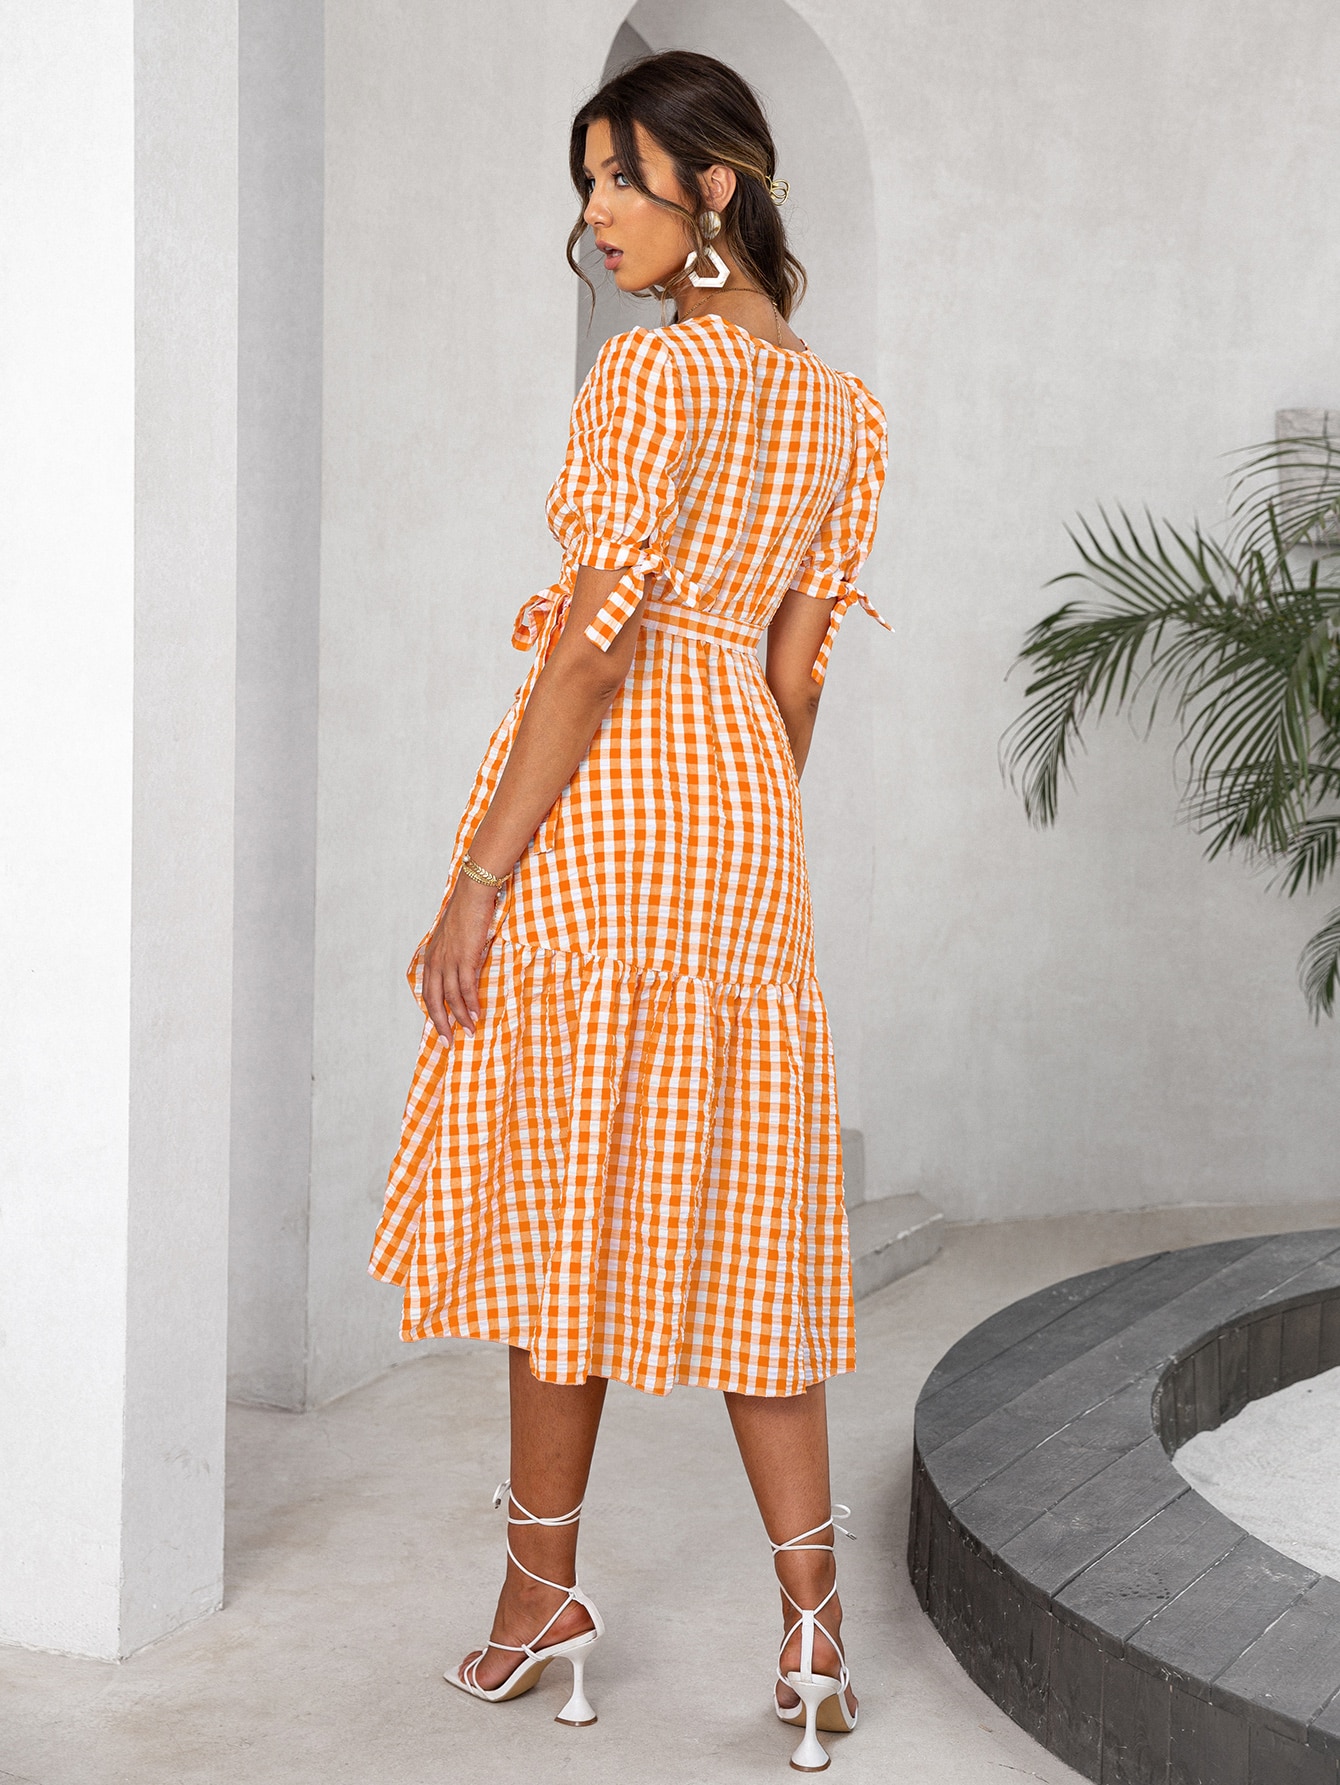 Simplee-Casual-puff-sleeves-plaid-summer-dress-women-V-neck-lace-up-ruffle-office-dresses-A-3